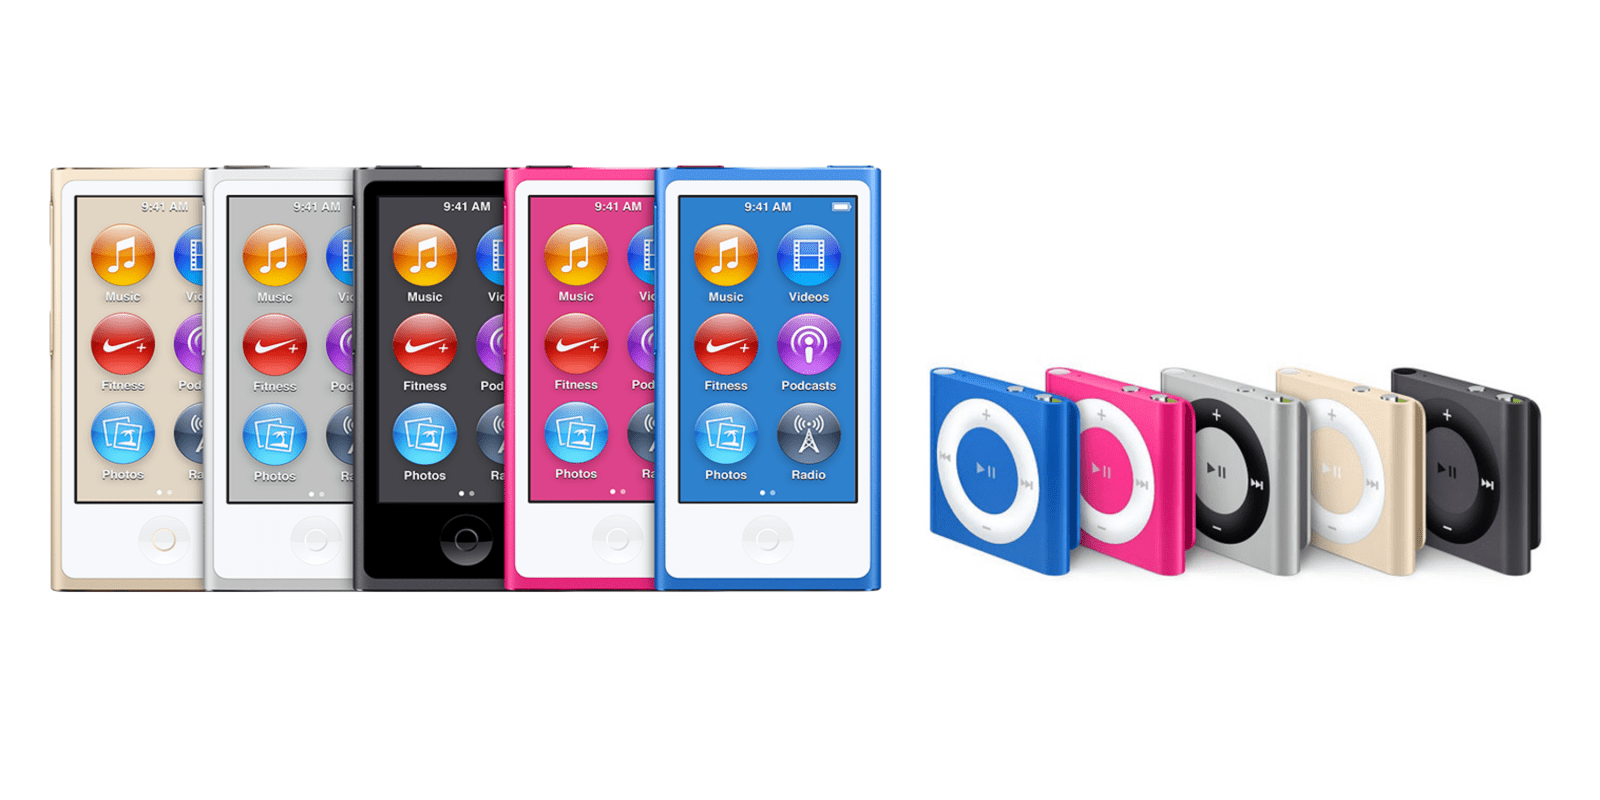 The iPod touch and 'iPod' brand are officially dead - 9to5Mac